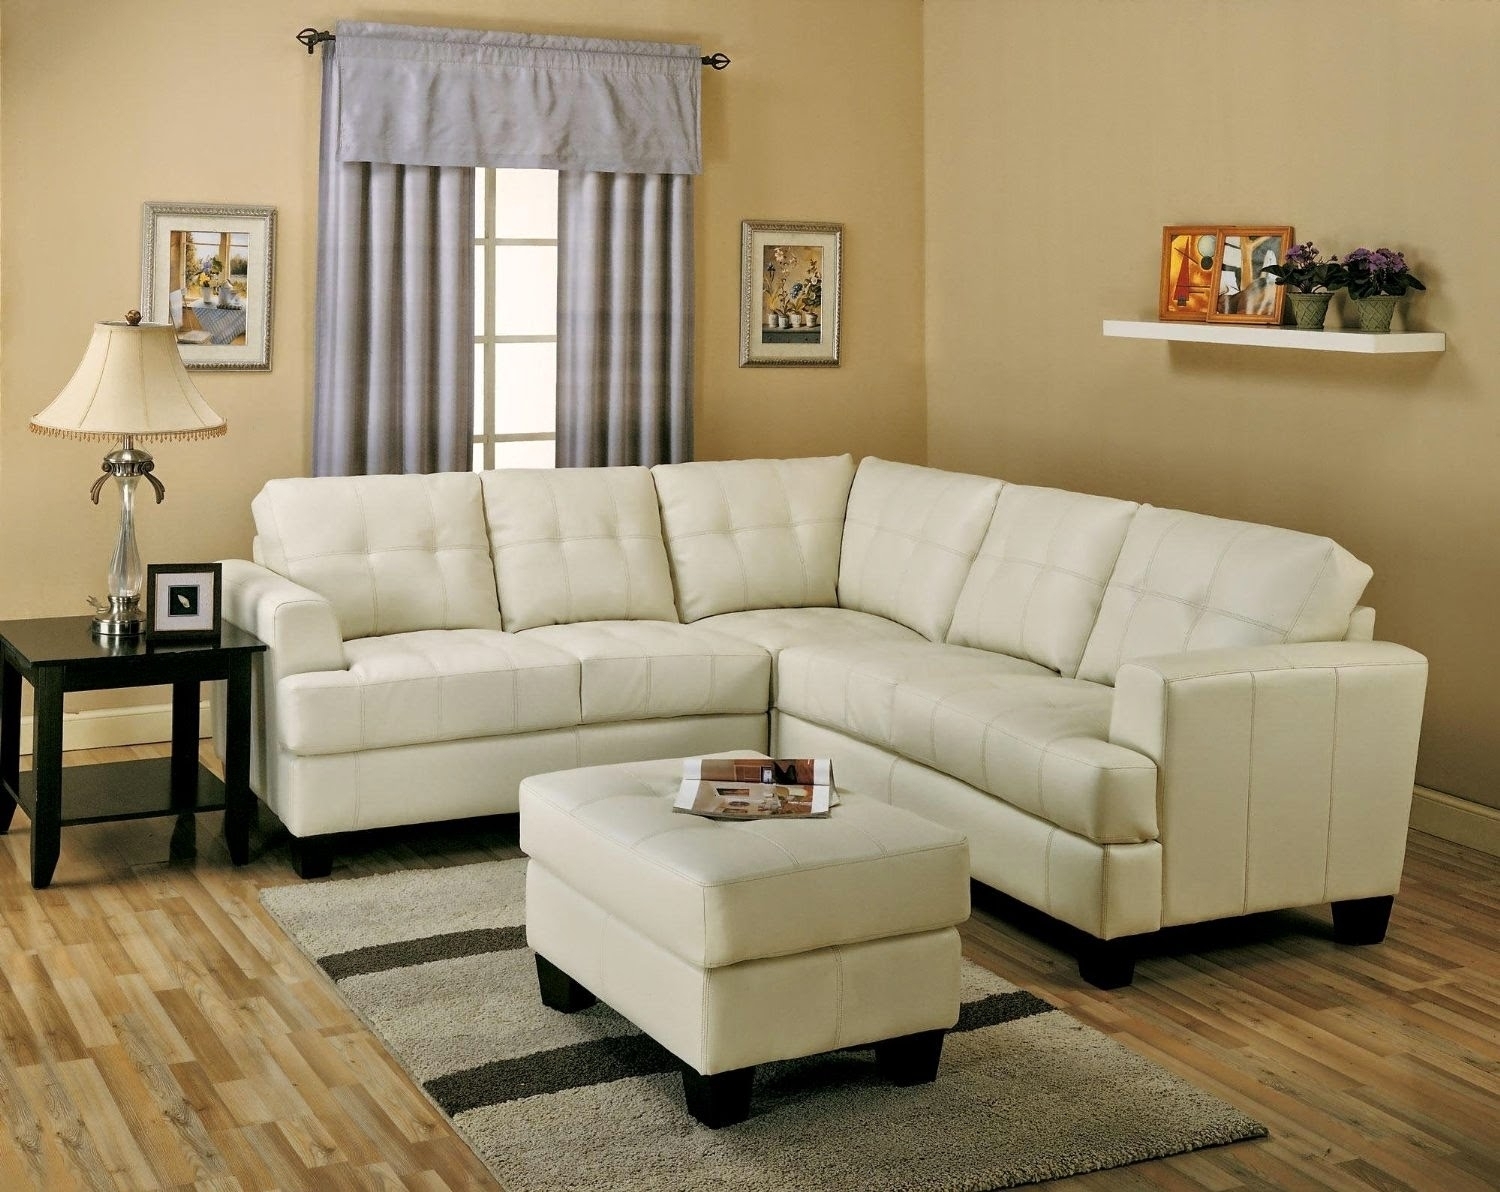 small sectional sofa in gray leather